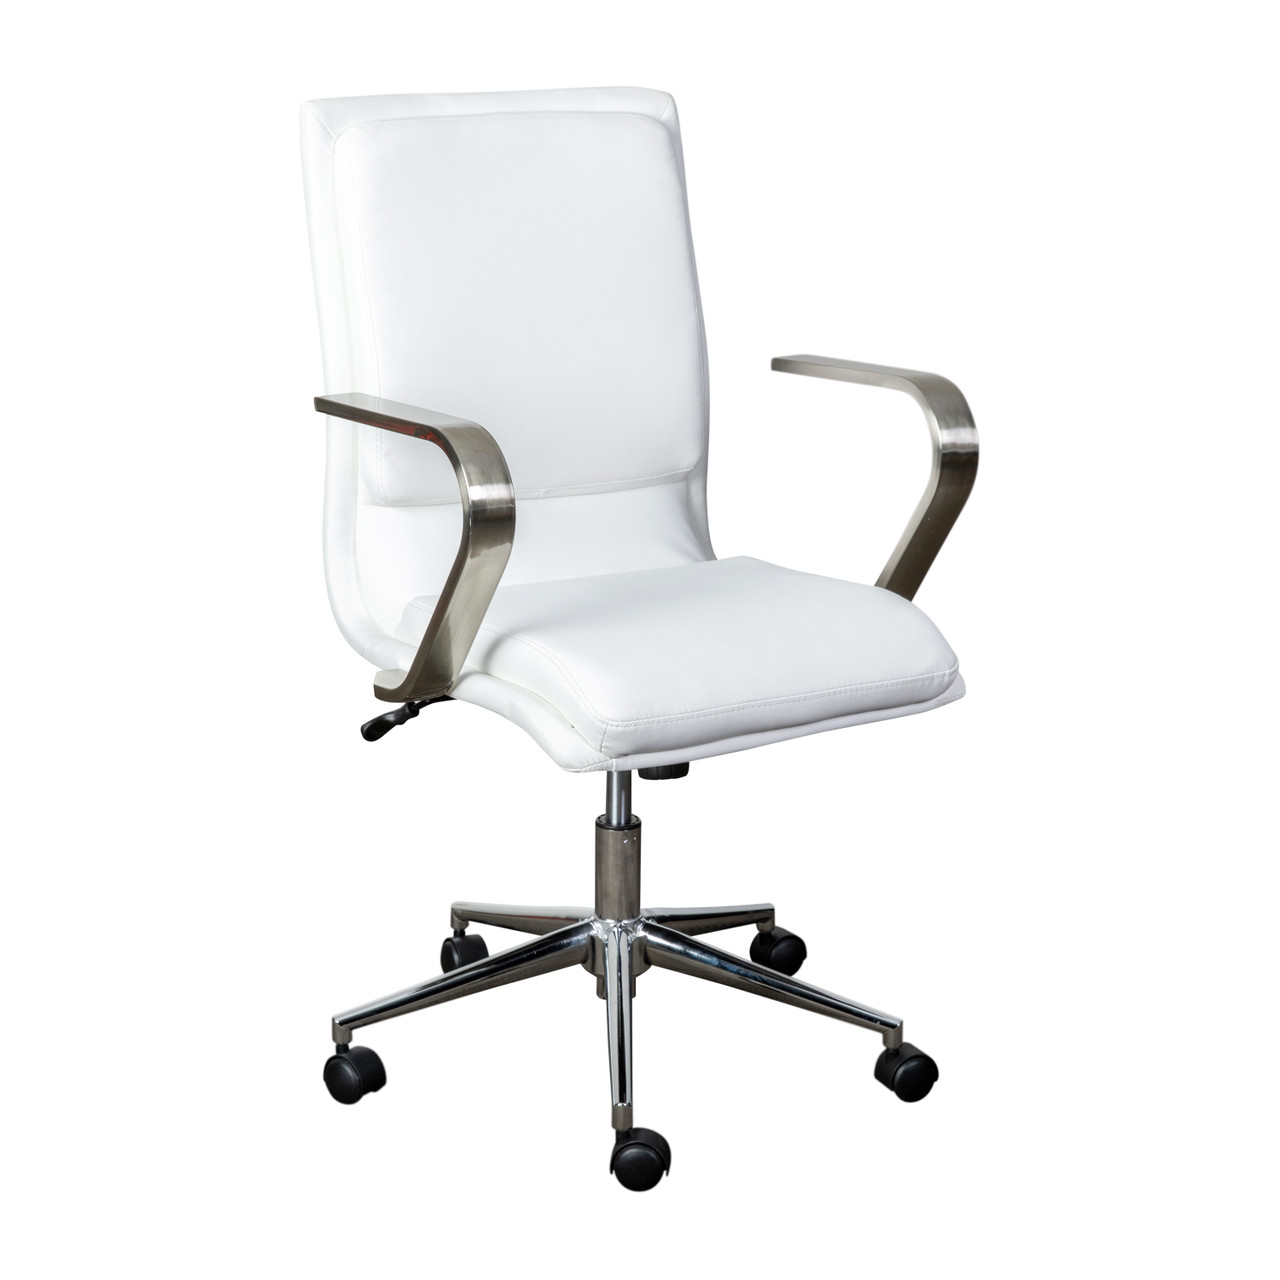 Flash Furniture James Mid-Back Designer Executive LeatherSoft Office Chair w/ Brushed Chrome Base & Arms, White, Model# GO-21111B-WH-CHR-GG